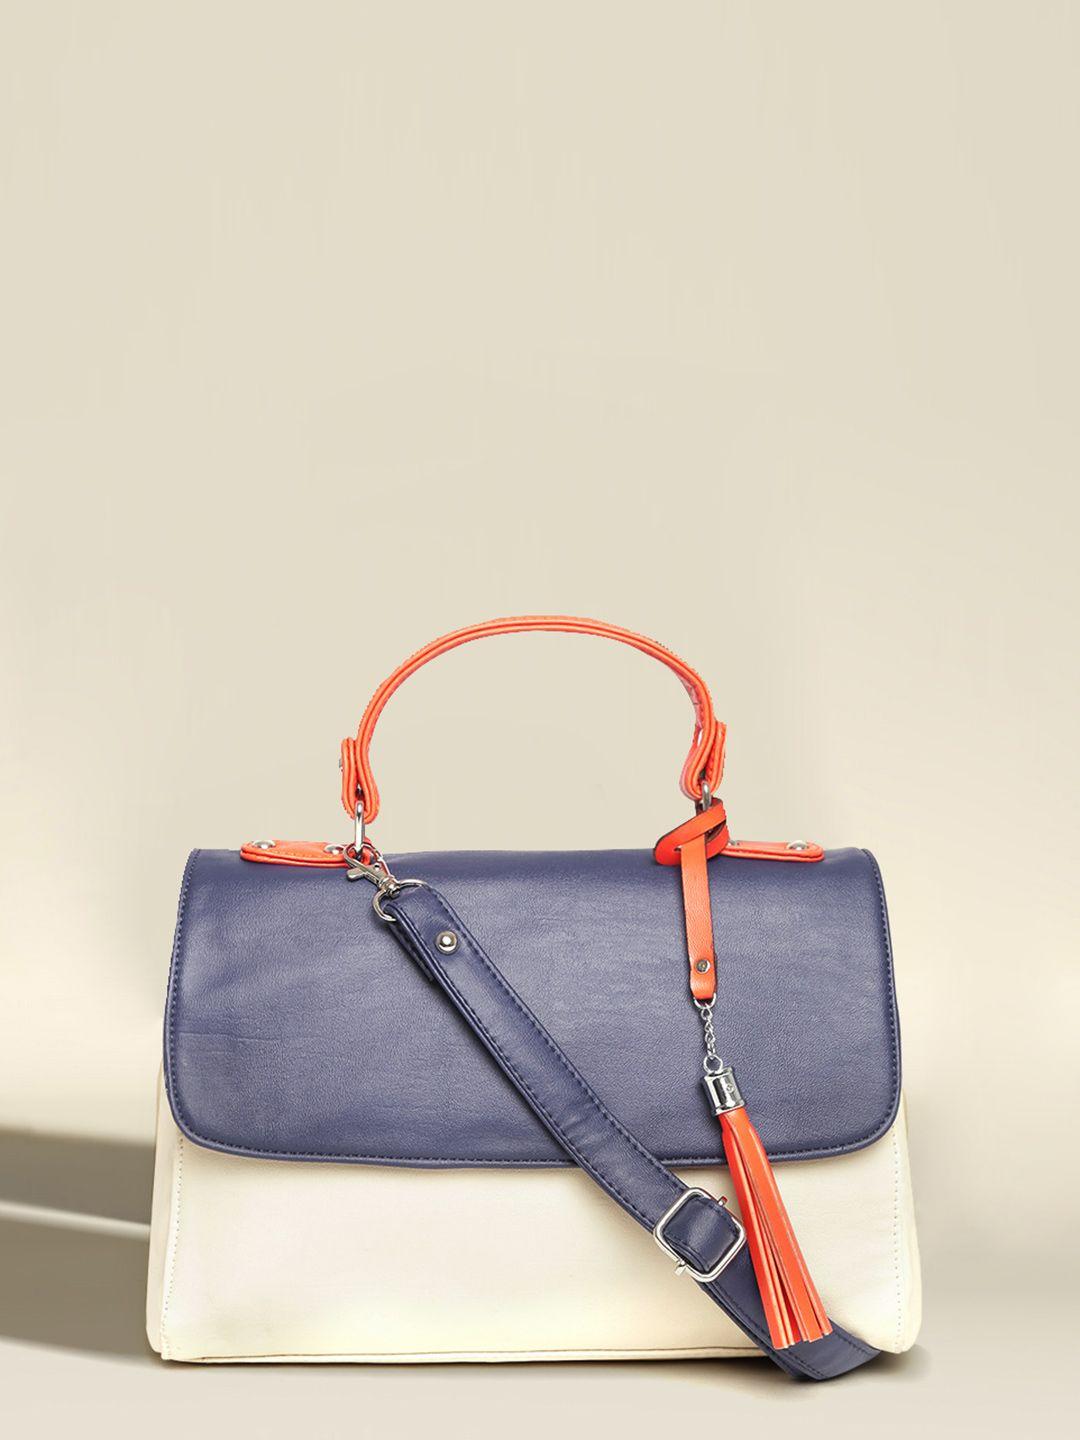 mast & harbour cream-coloured colourblocked satchel with sling strap